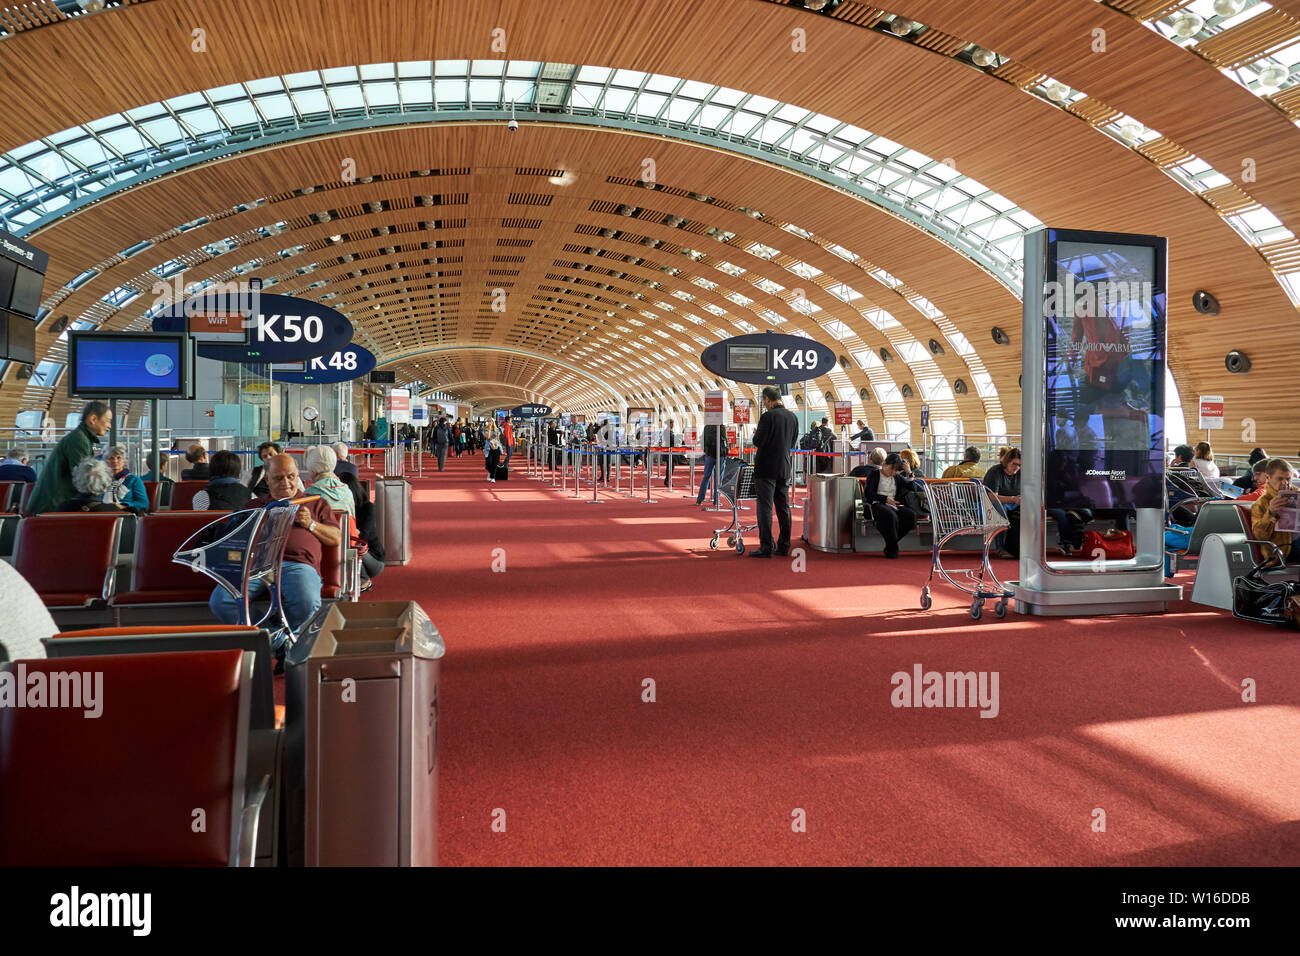 Paris Charles de Gaulle Airport is a 4-Star Airport